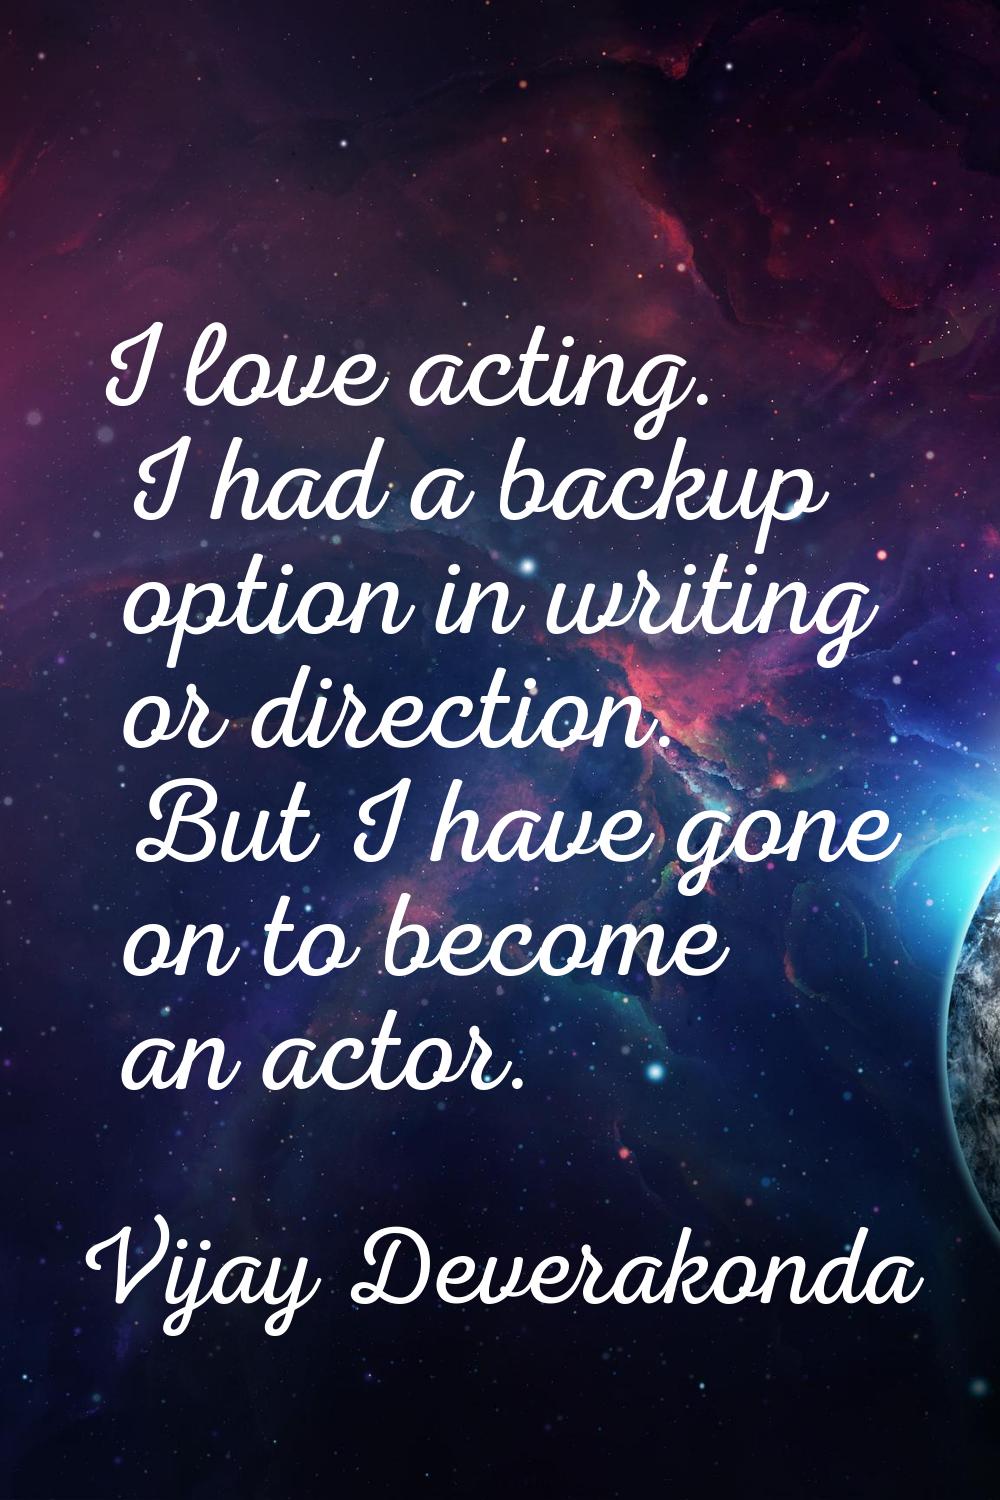 I love acting. I had a backup option in writing or direction. But I have gone on to become an actor